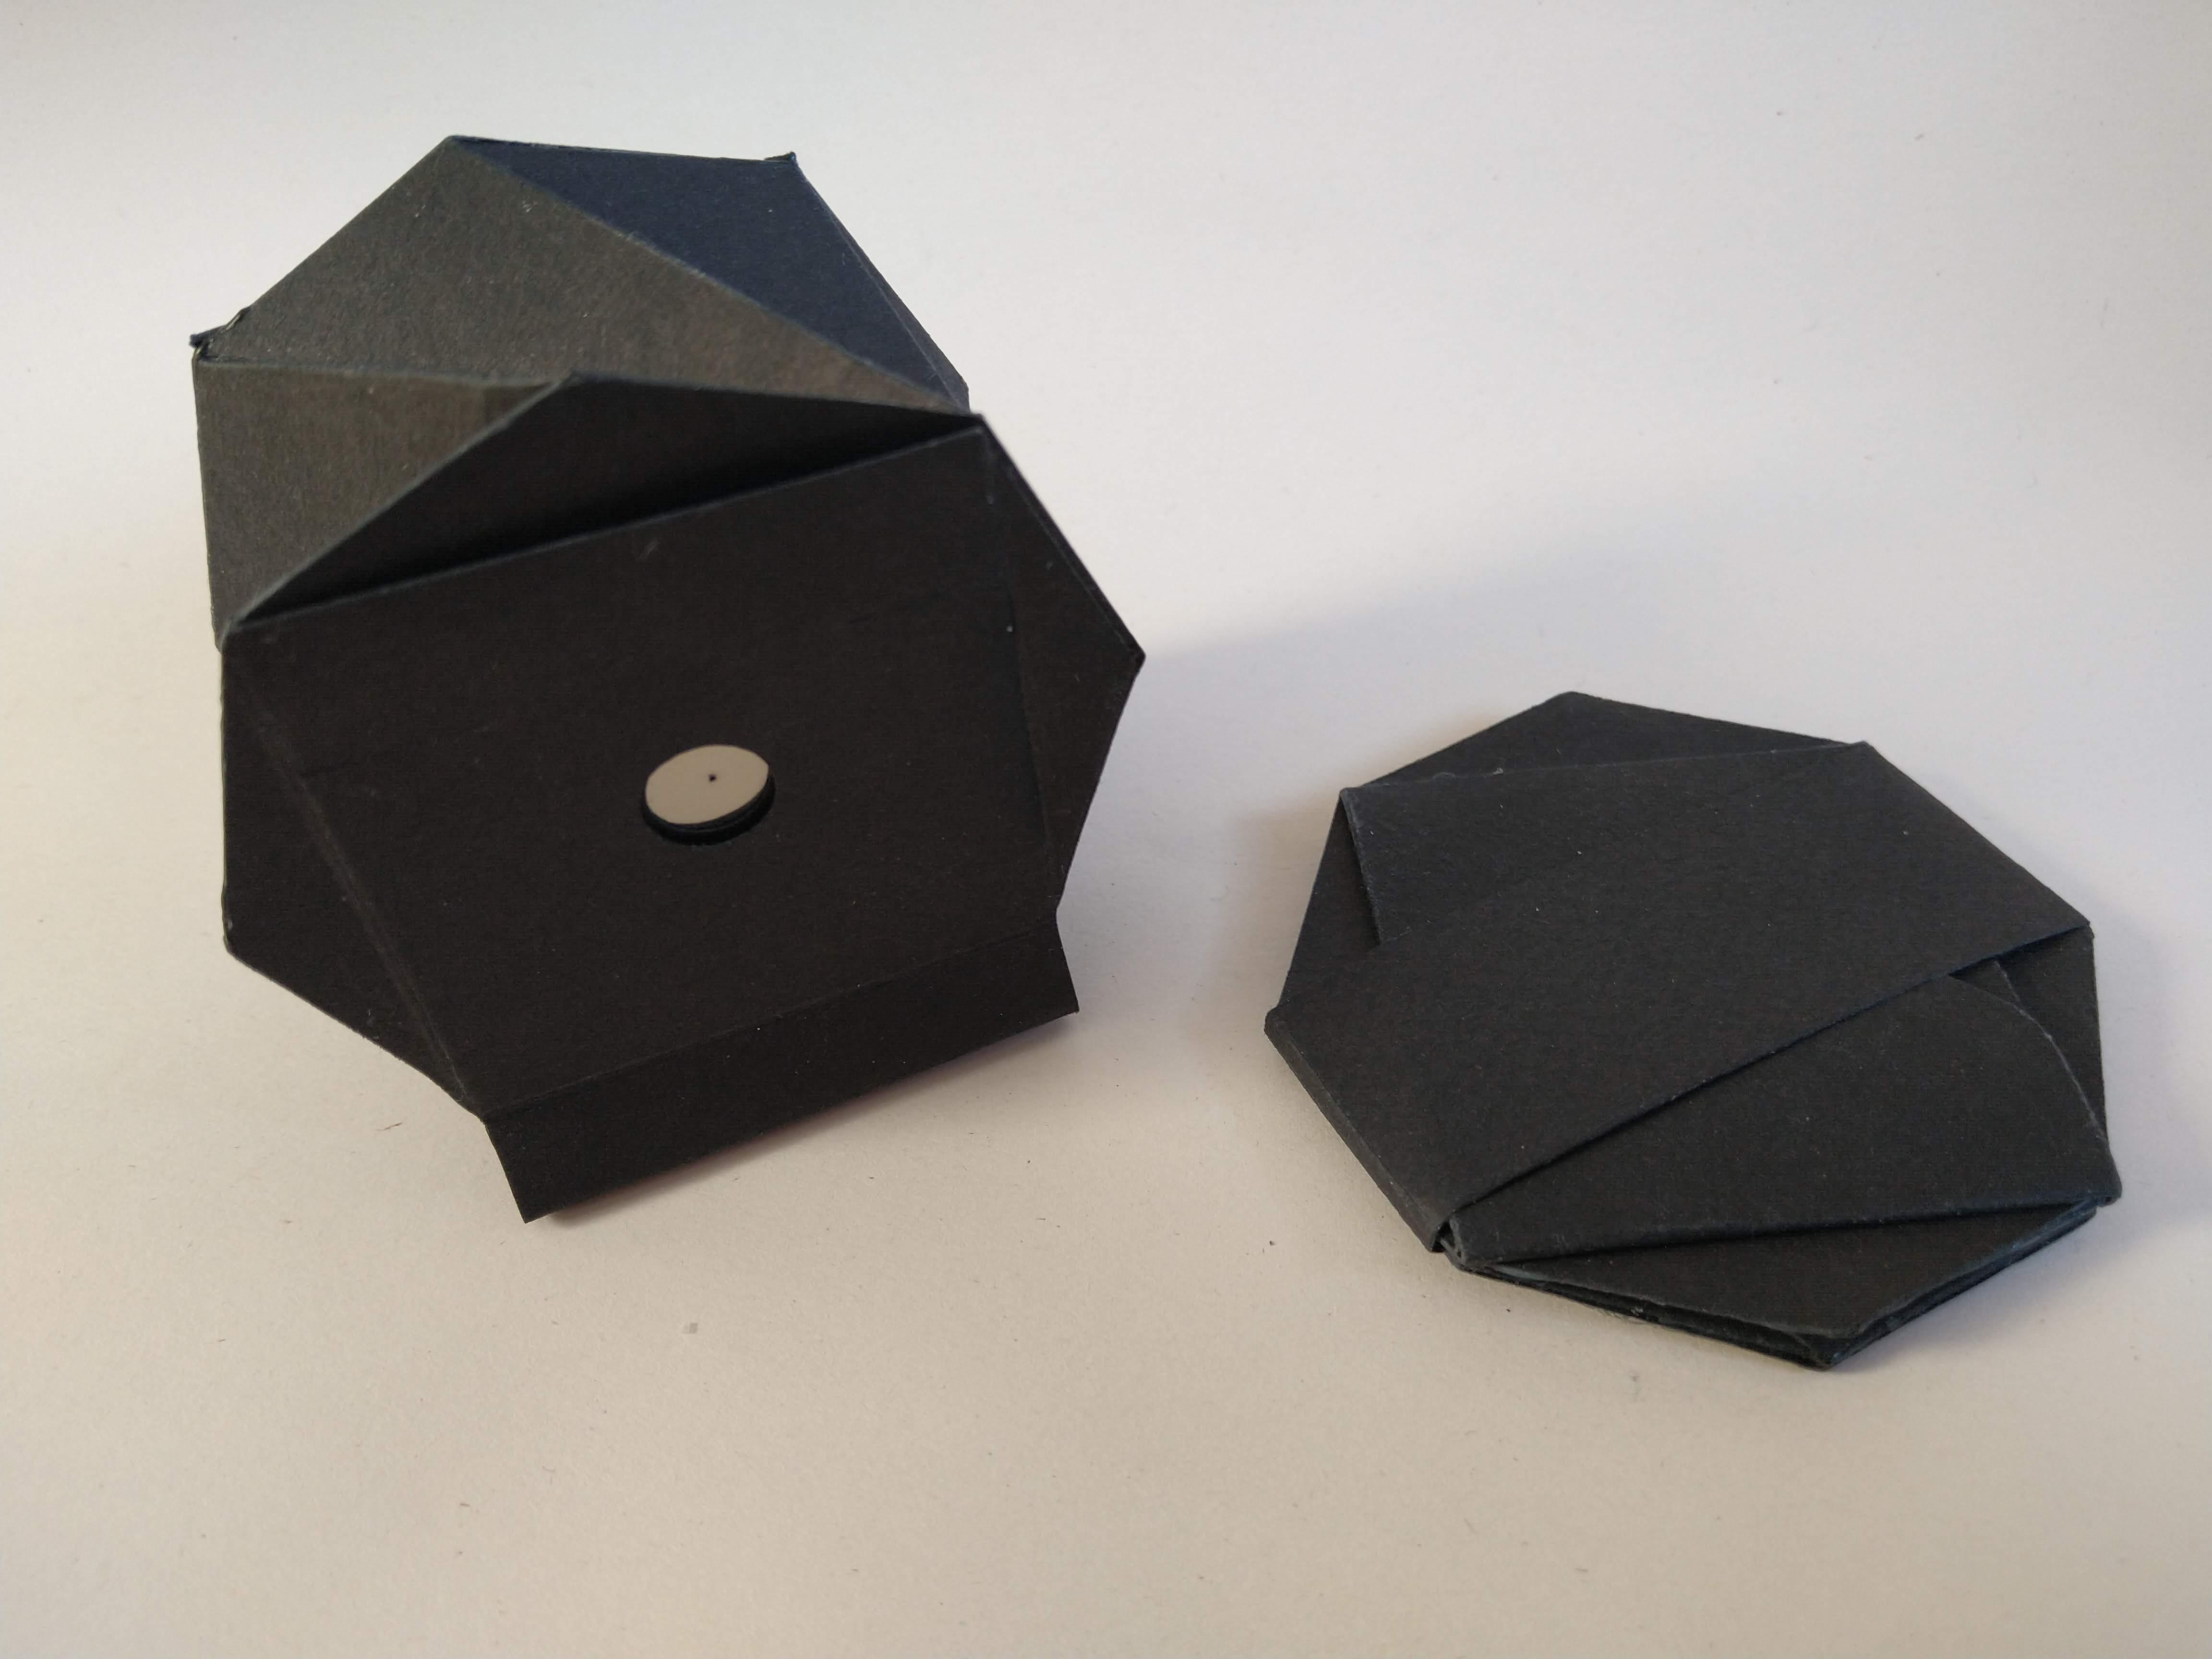 Collapsible Origami Pinhole Camera